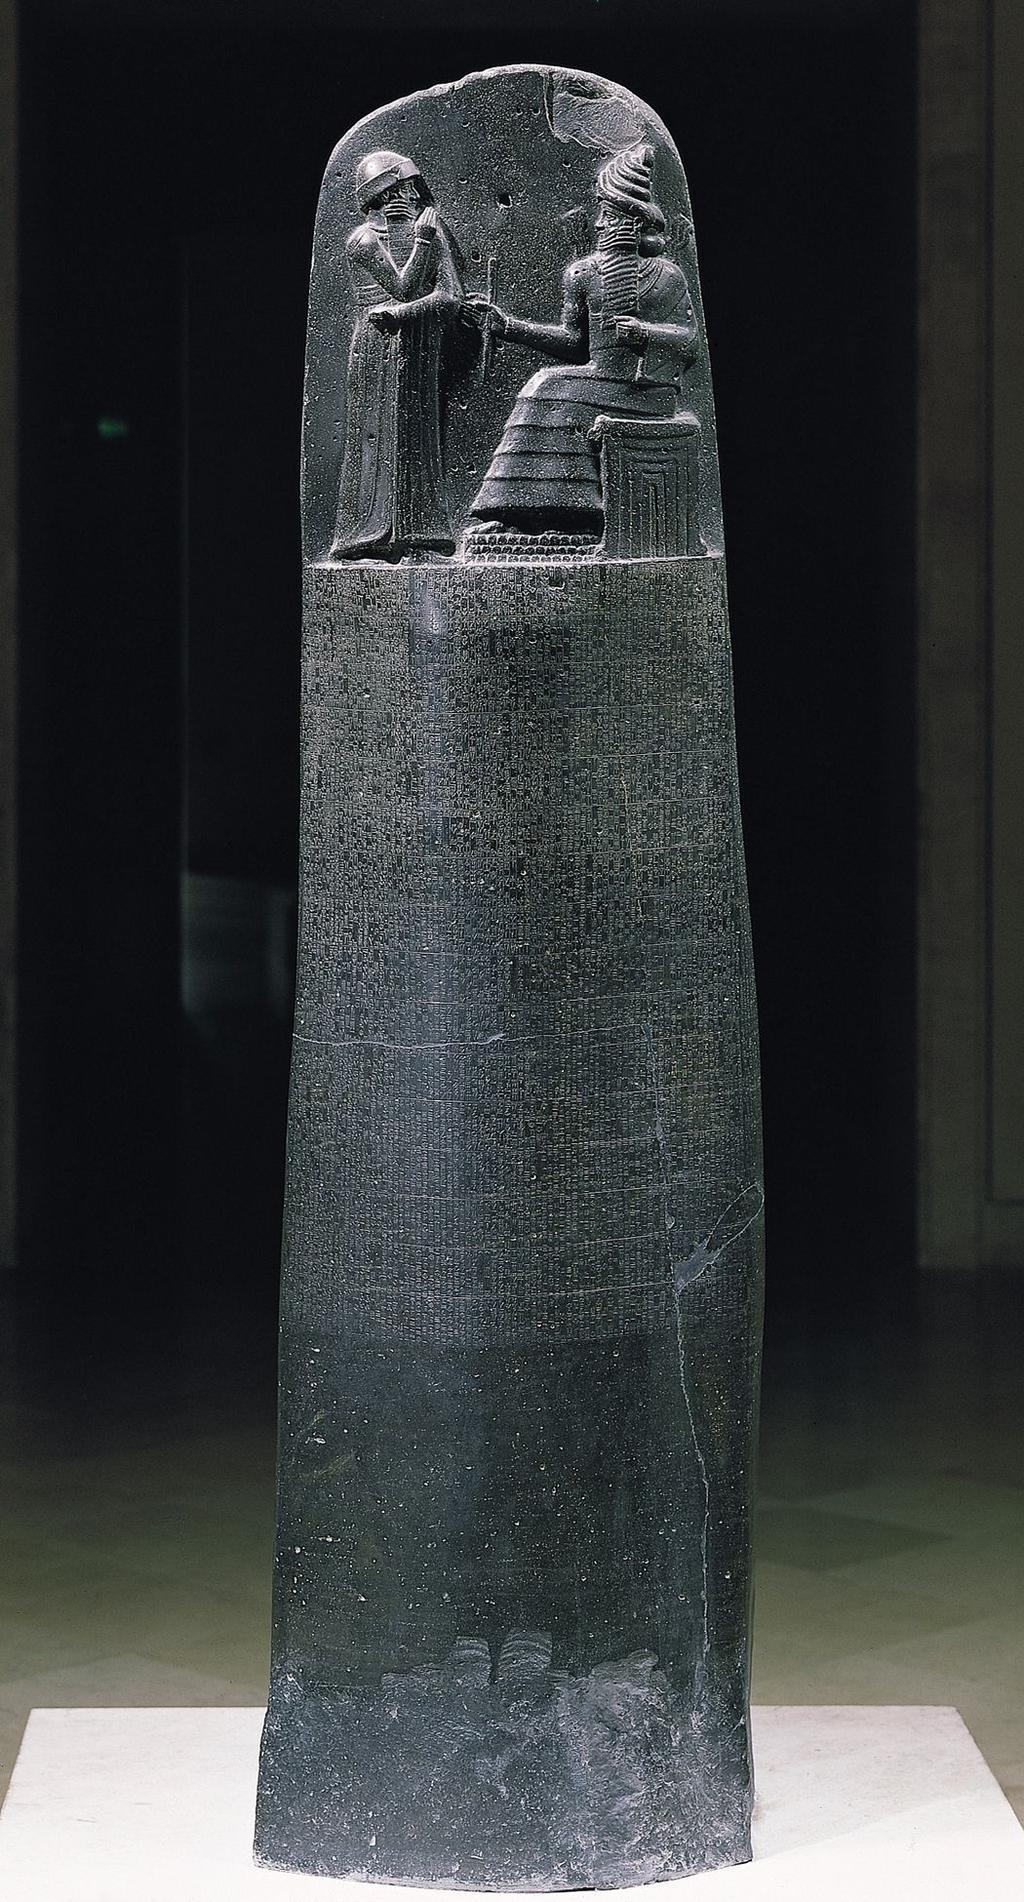 Hammurabi https://youtu.be/sohxpx_xz6y Hammurabi was famous for conquests, and his system of laws, known as Hammurabi s laws. Eye for a eye.